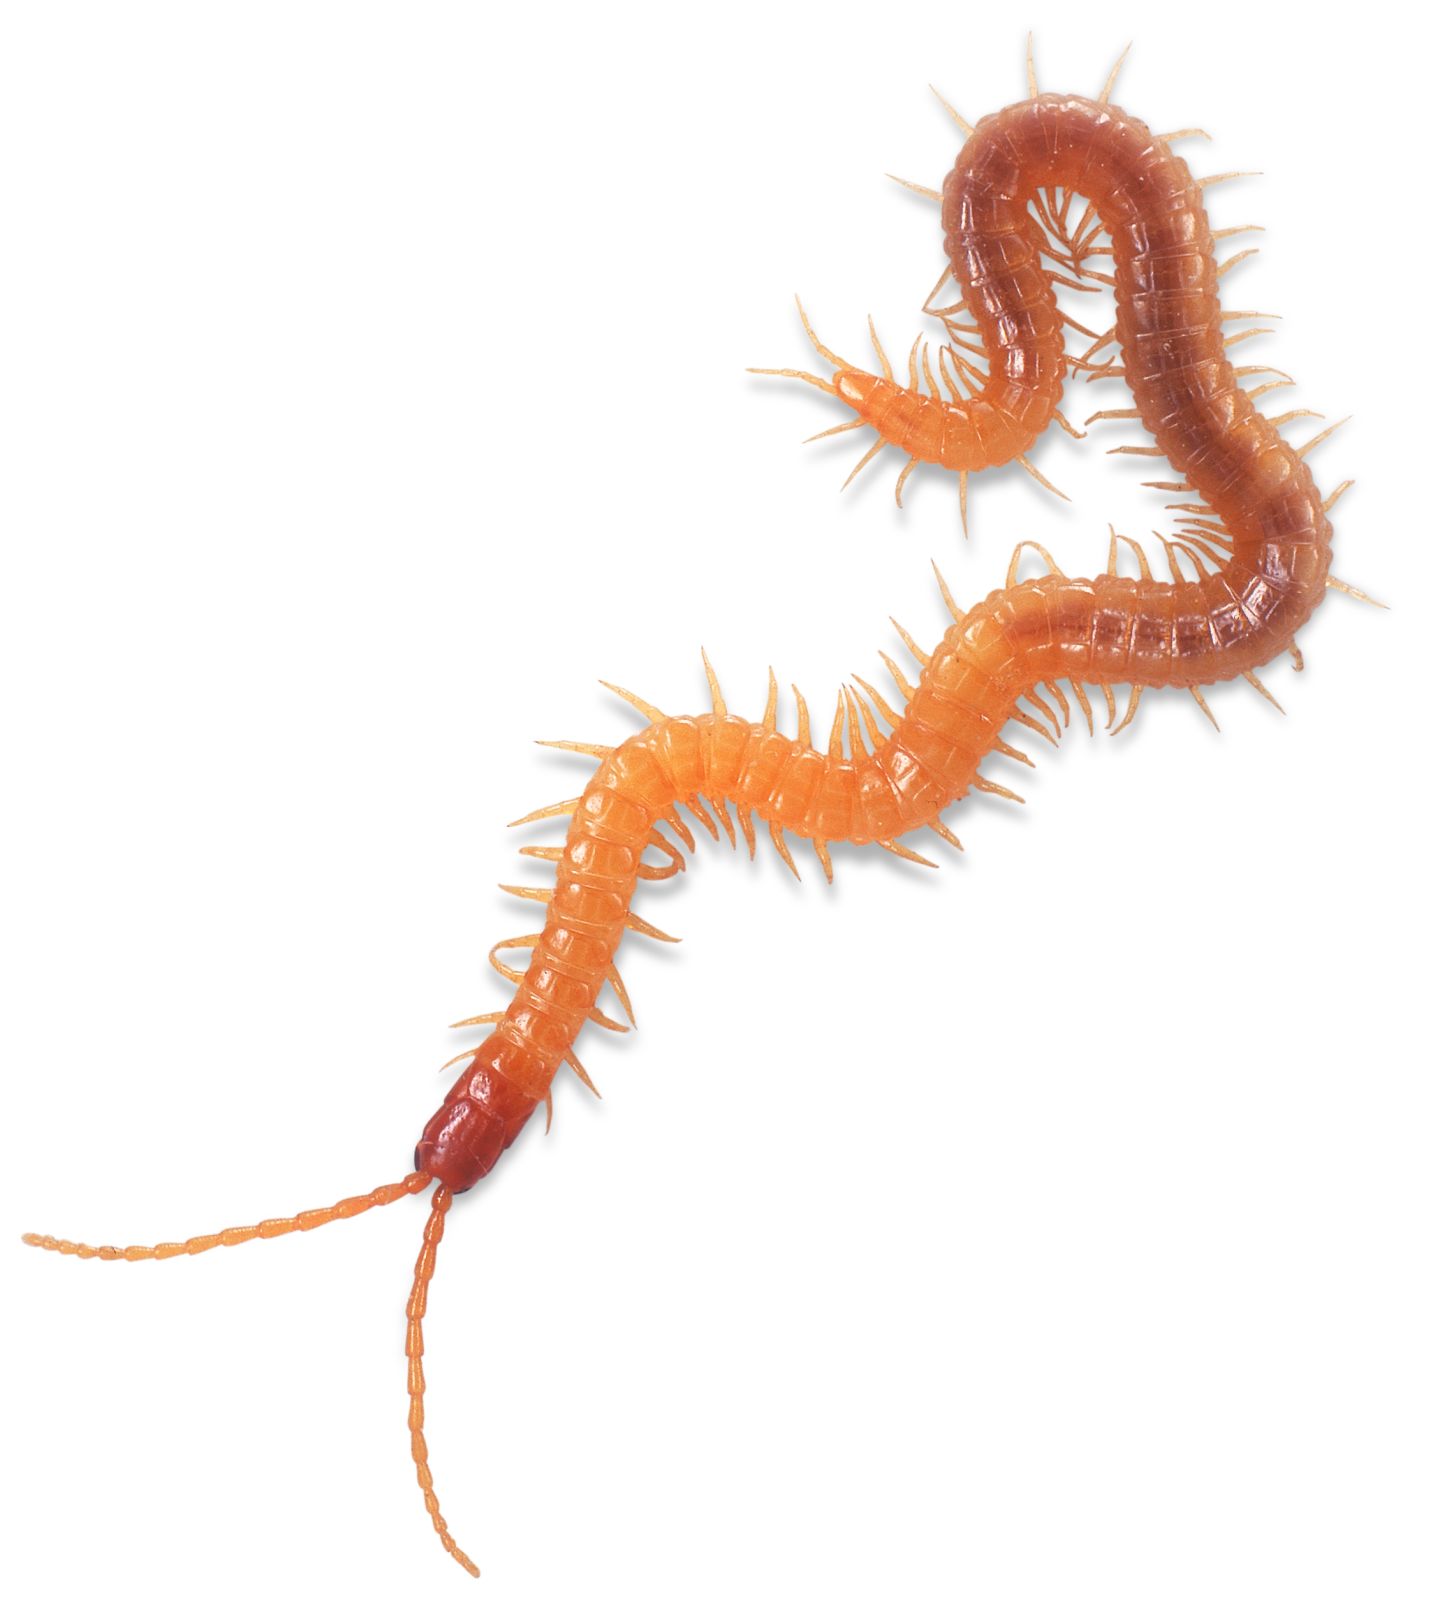 Difference Between Centipede and Millipede | DK Find Out